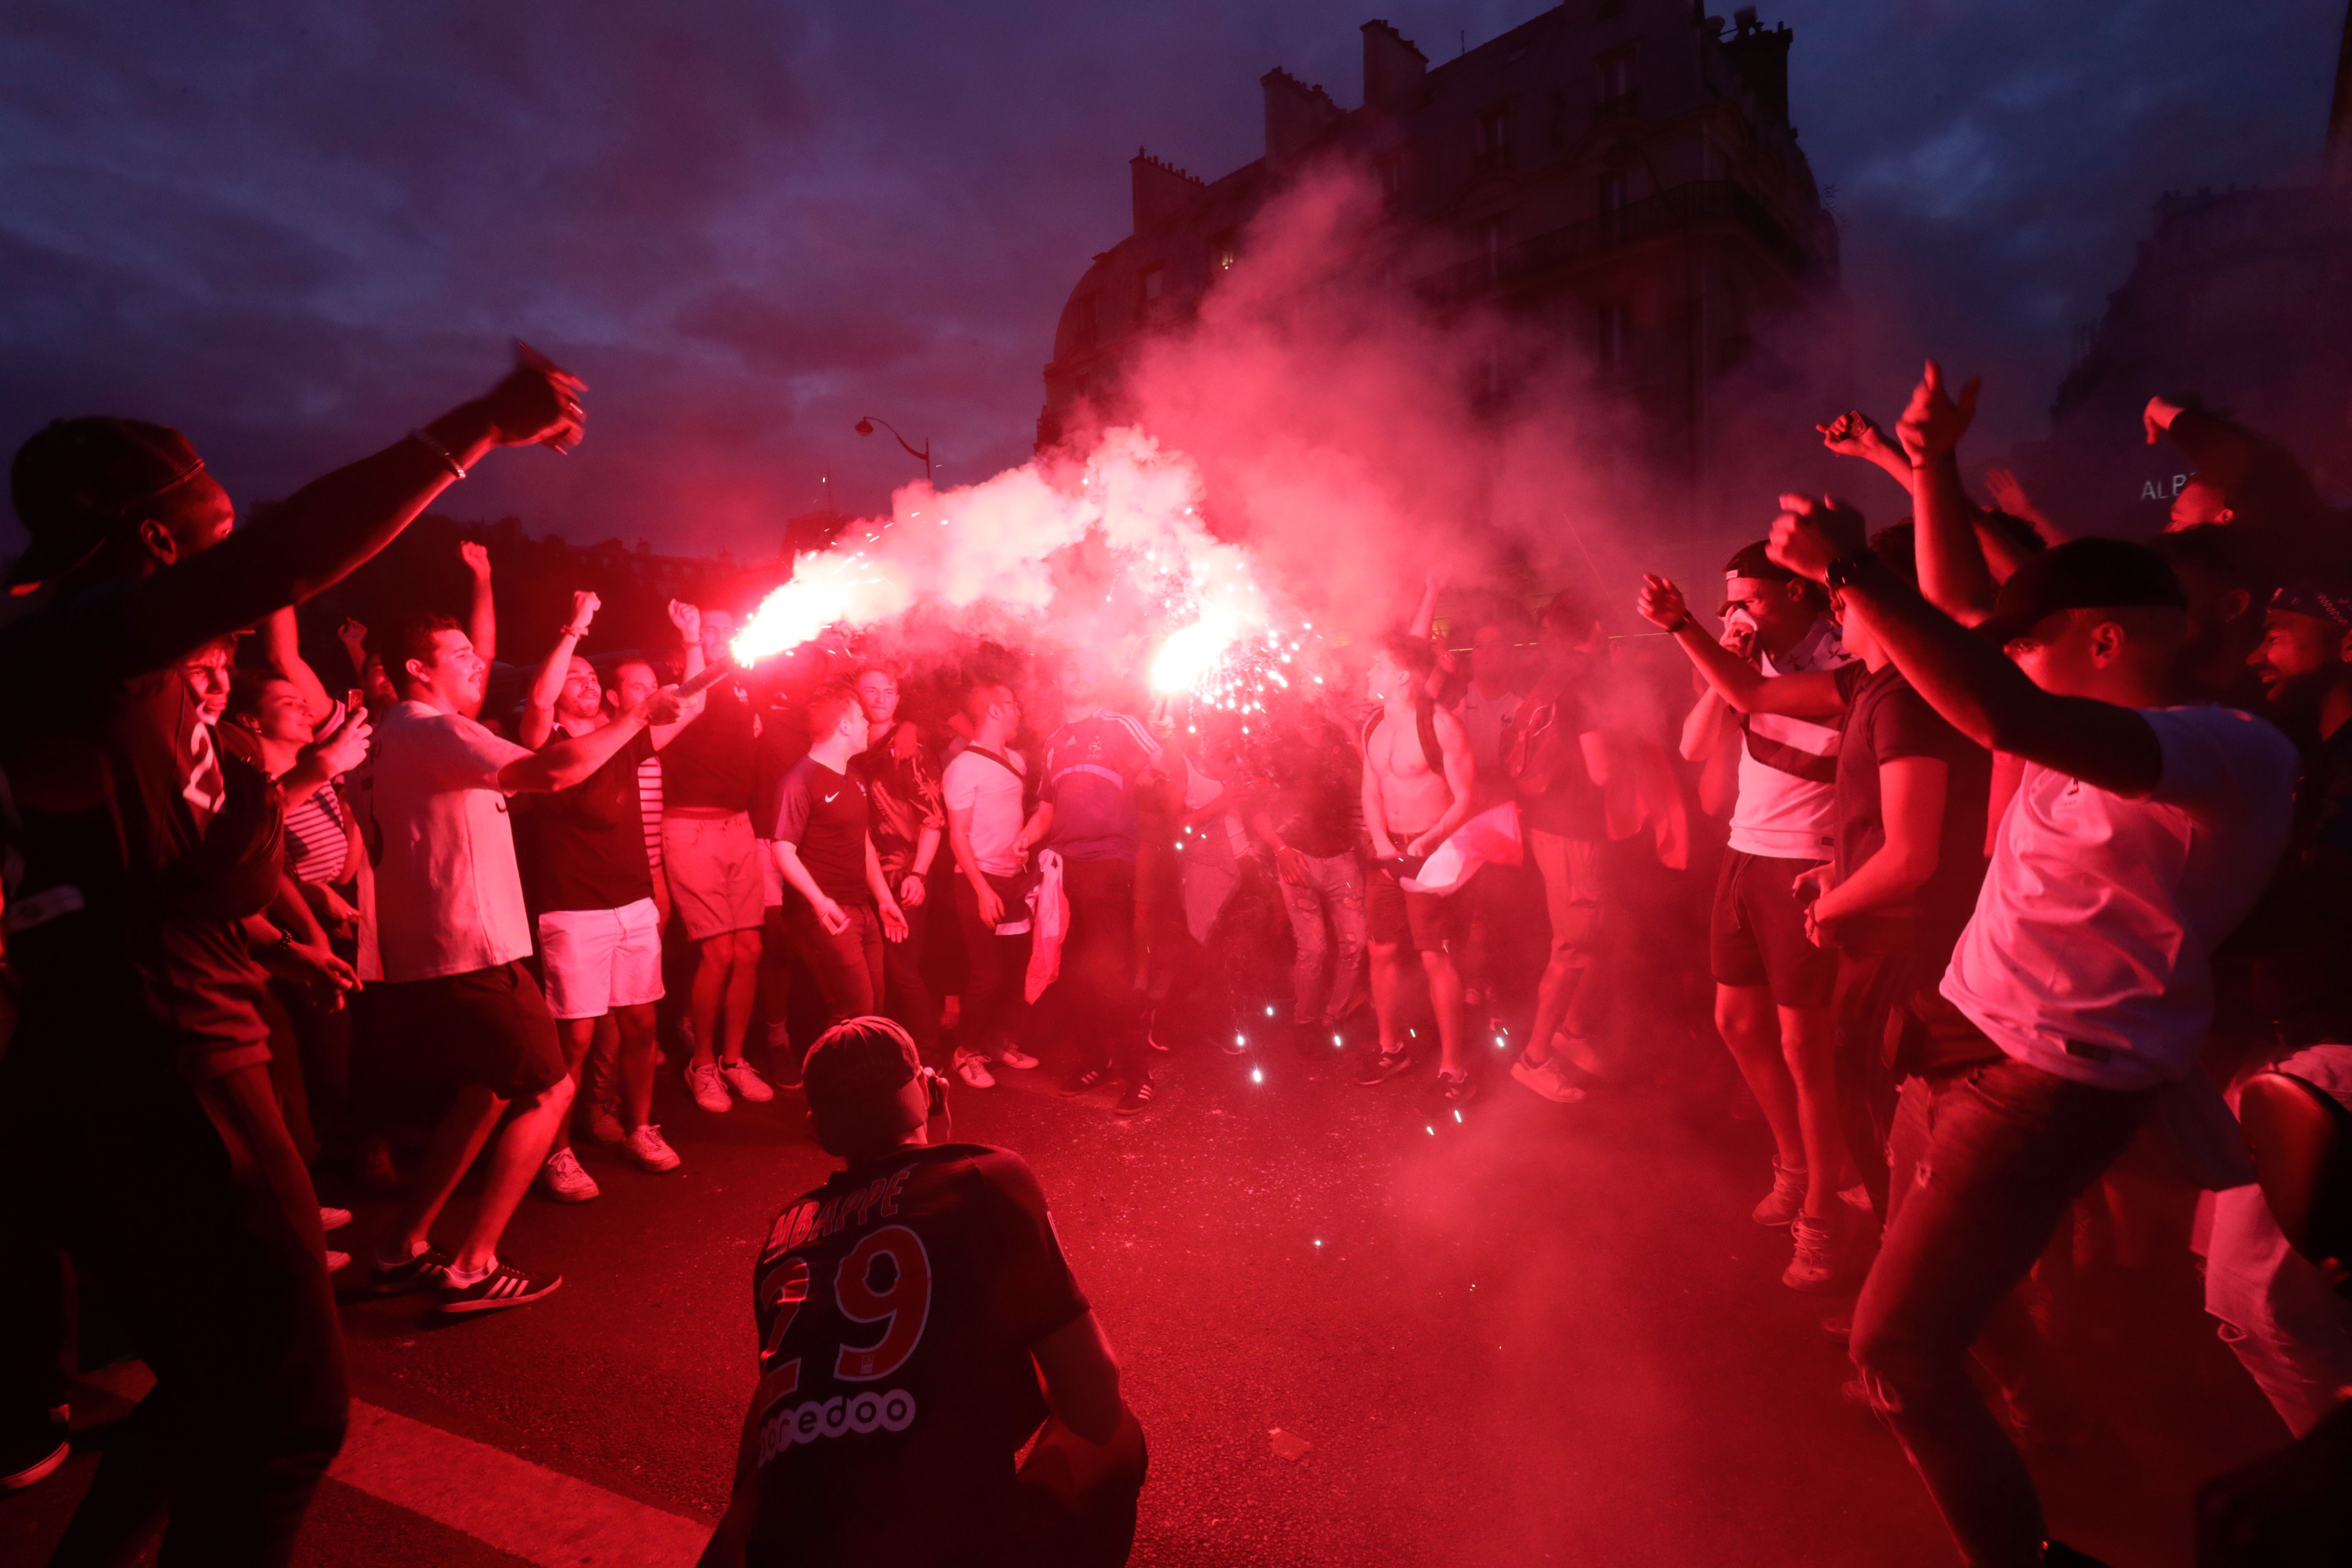 TOPSHOT - People celebrate France's victory in central Paris on July 10, 2018 after the final whistle of the Russia 2018 World Cup semi-final football match between France and Belgium. (Photo by Thomas SAMSON / AFP) (Photo credit should read THOMAS SAMSON/AFP/Getty Images)